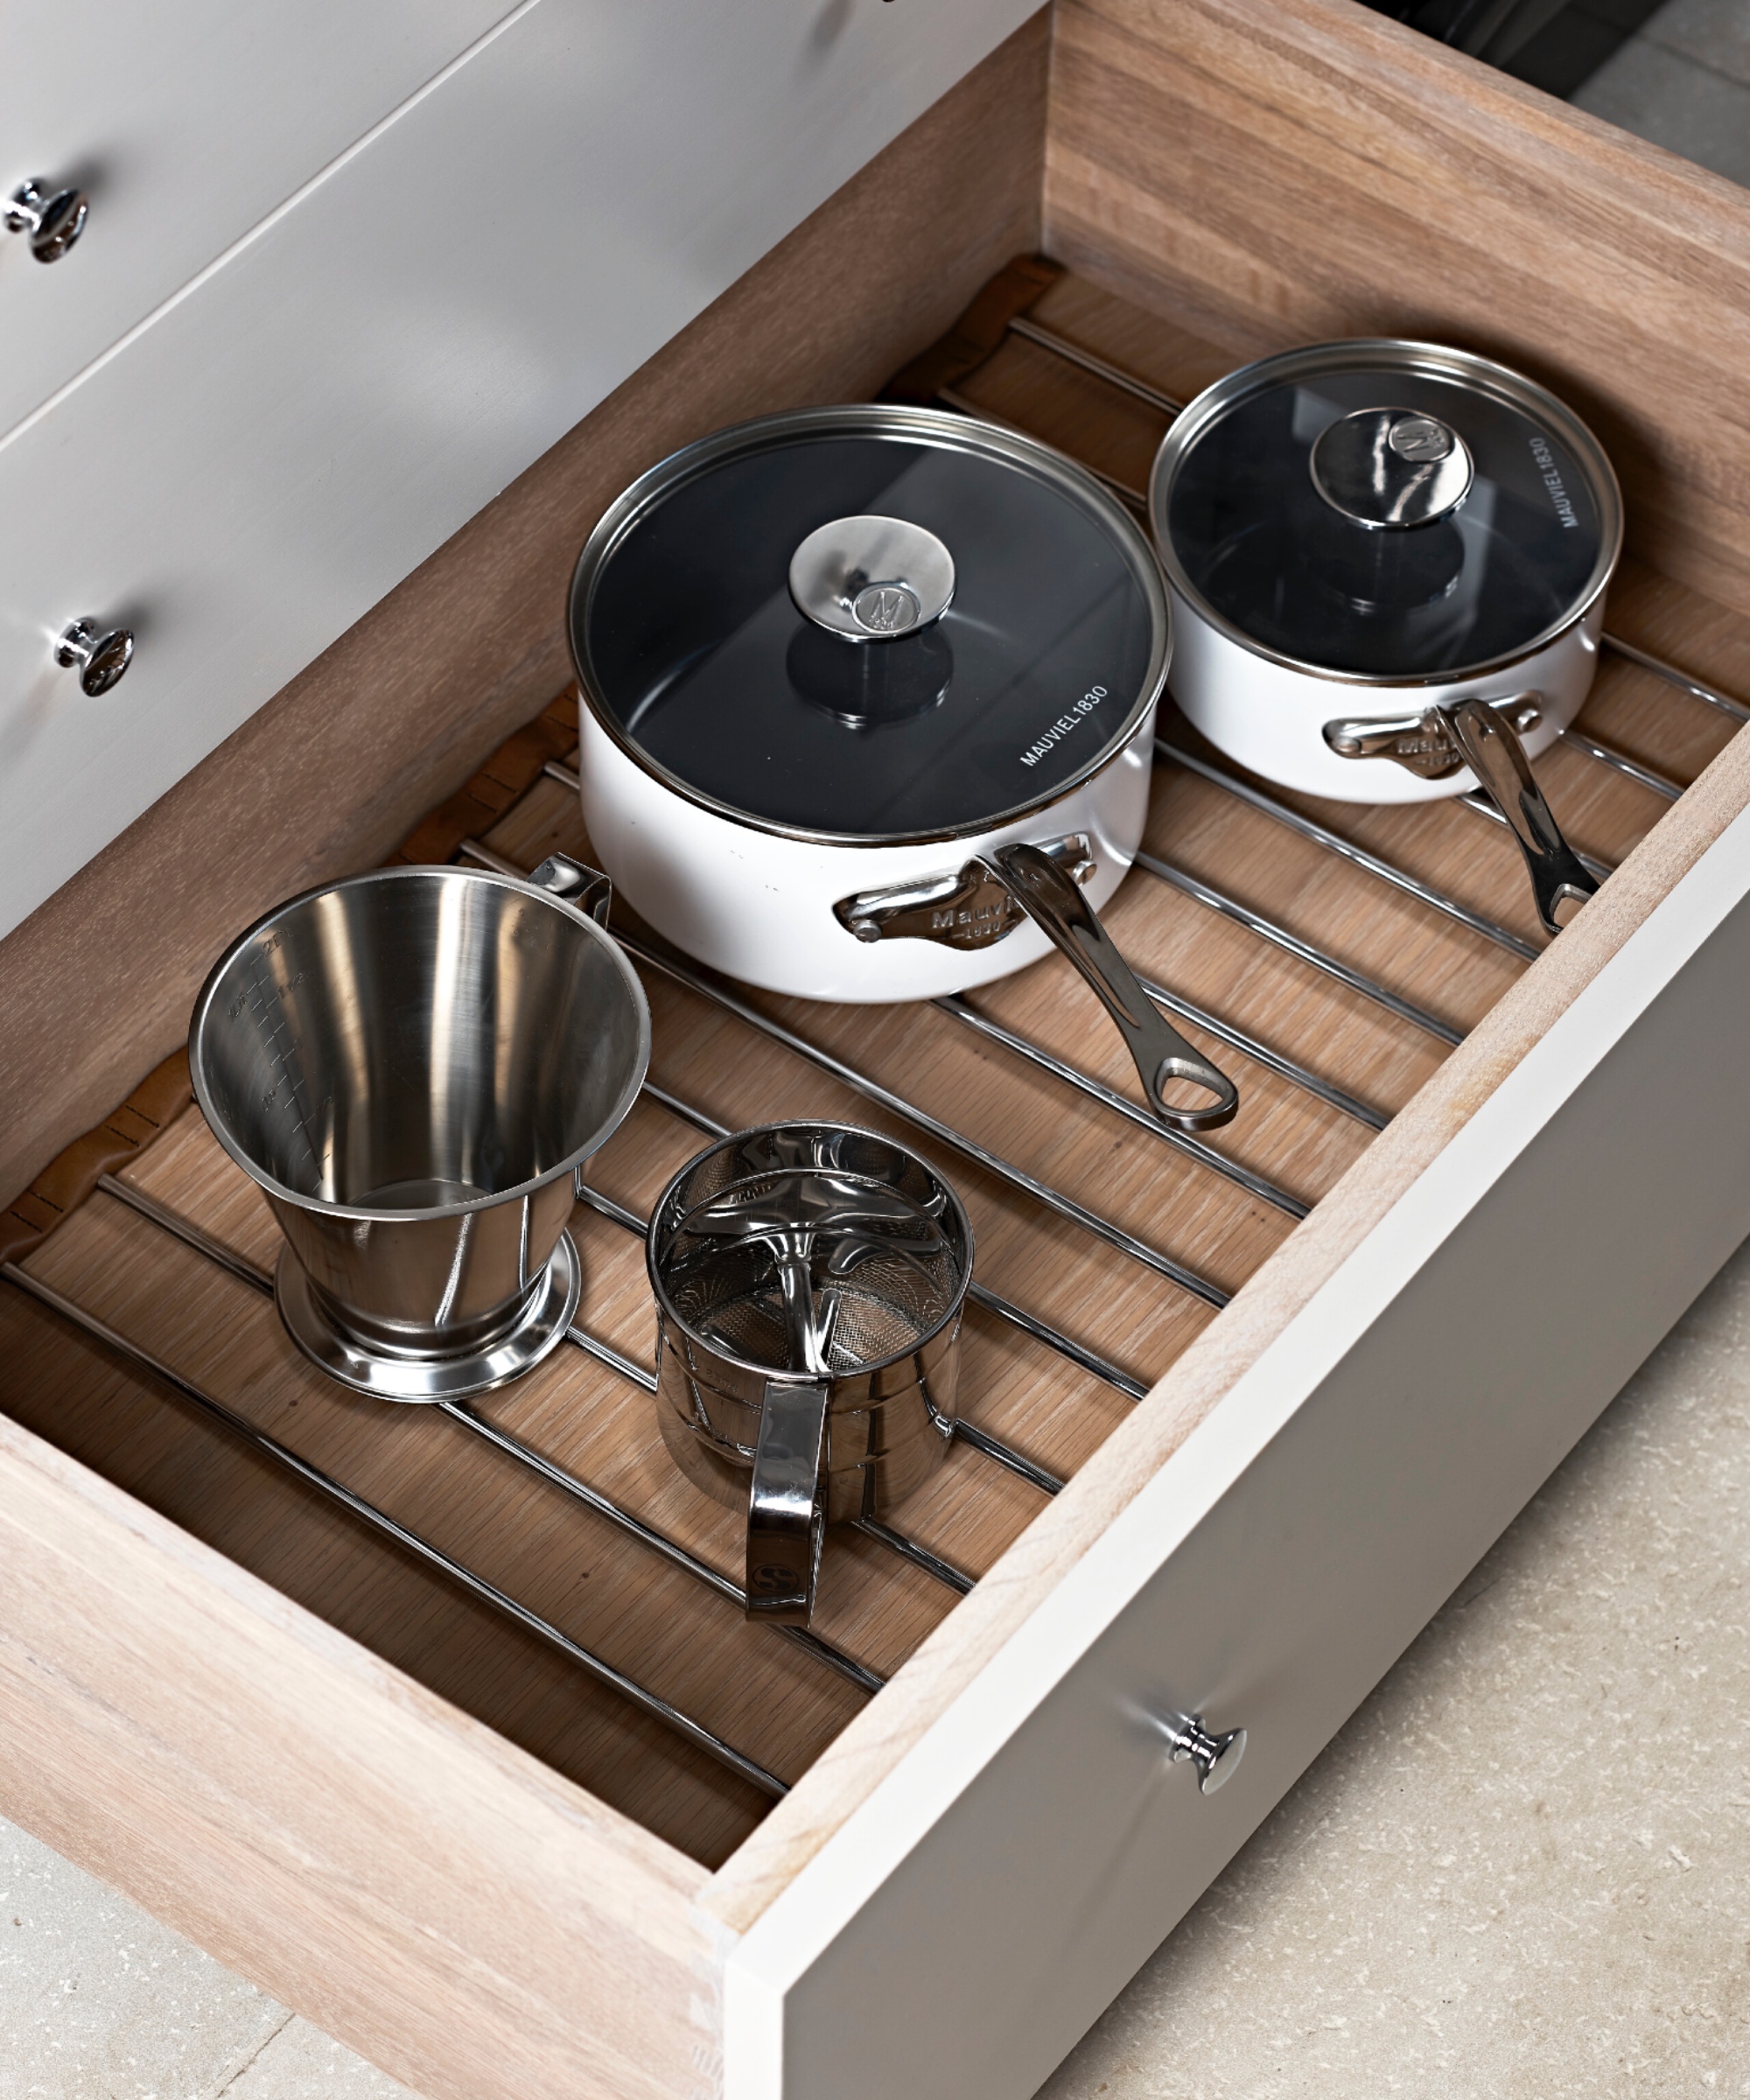 How to Organize Pots and Pans: 10 Tips for Storing Your Cookware